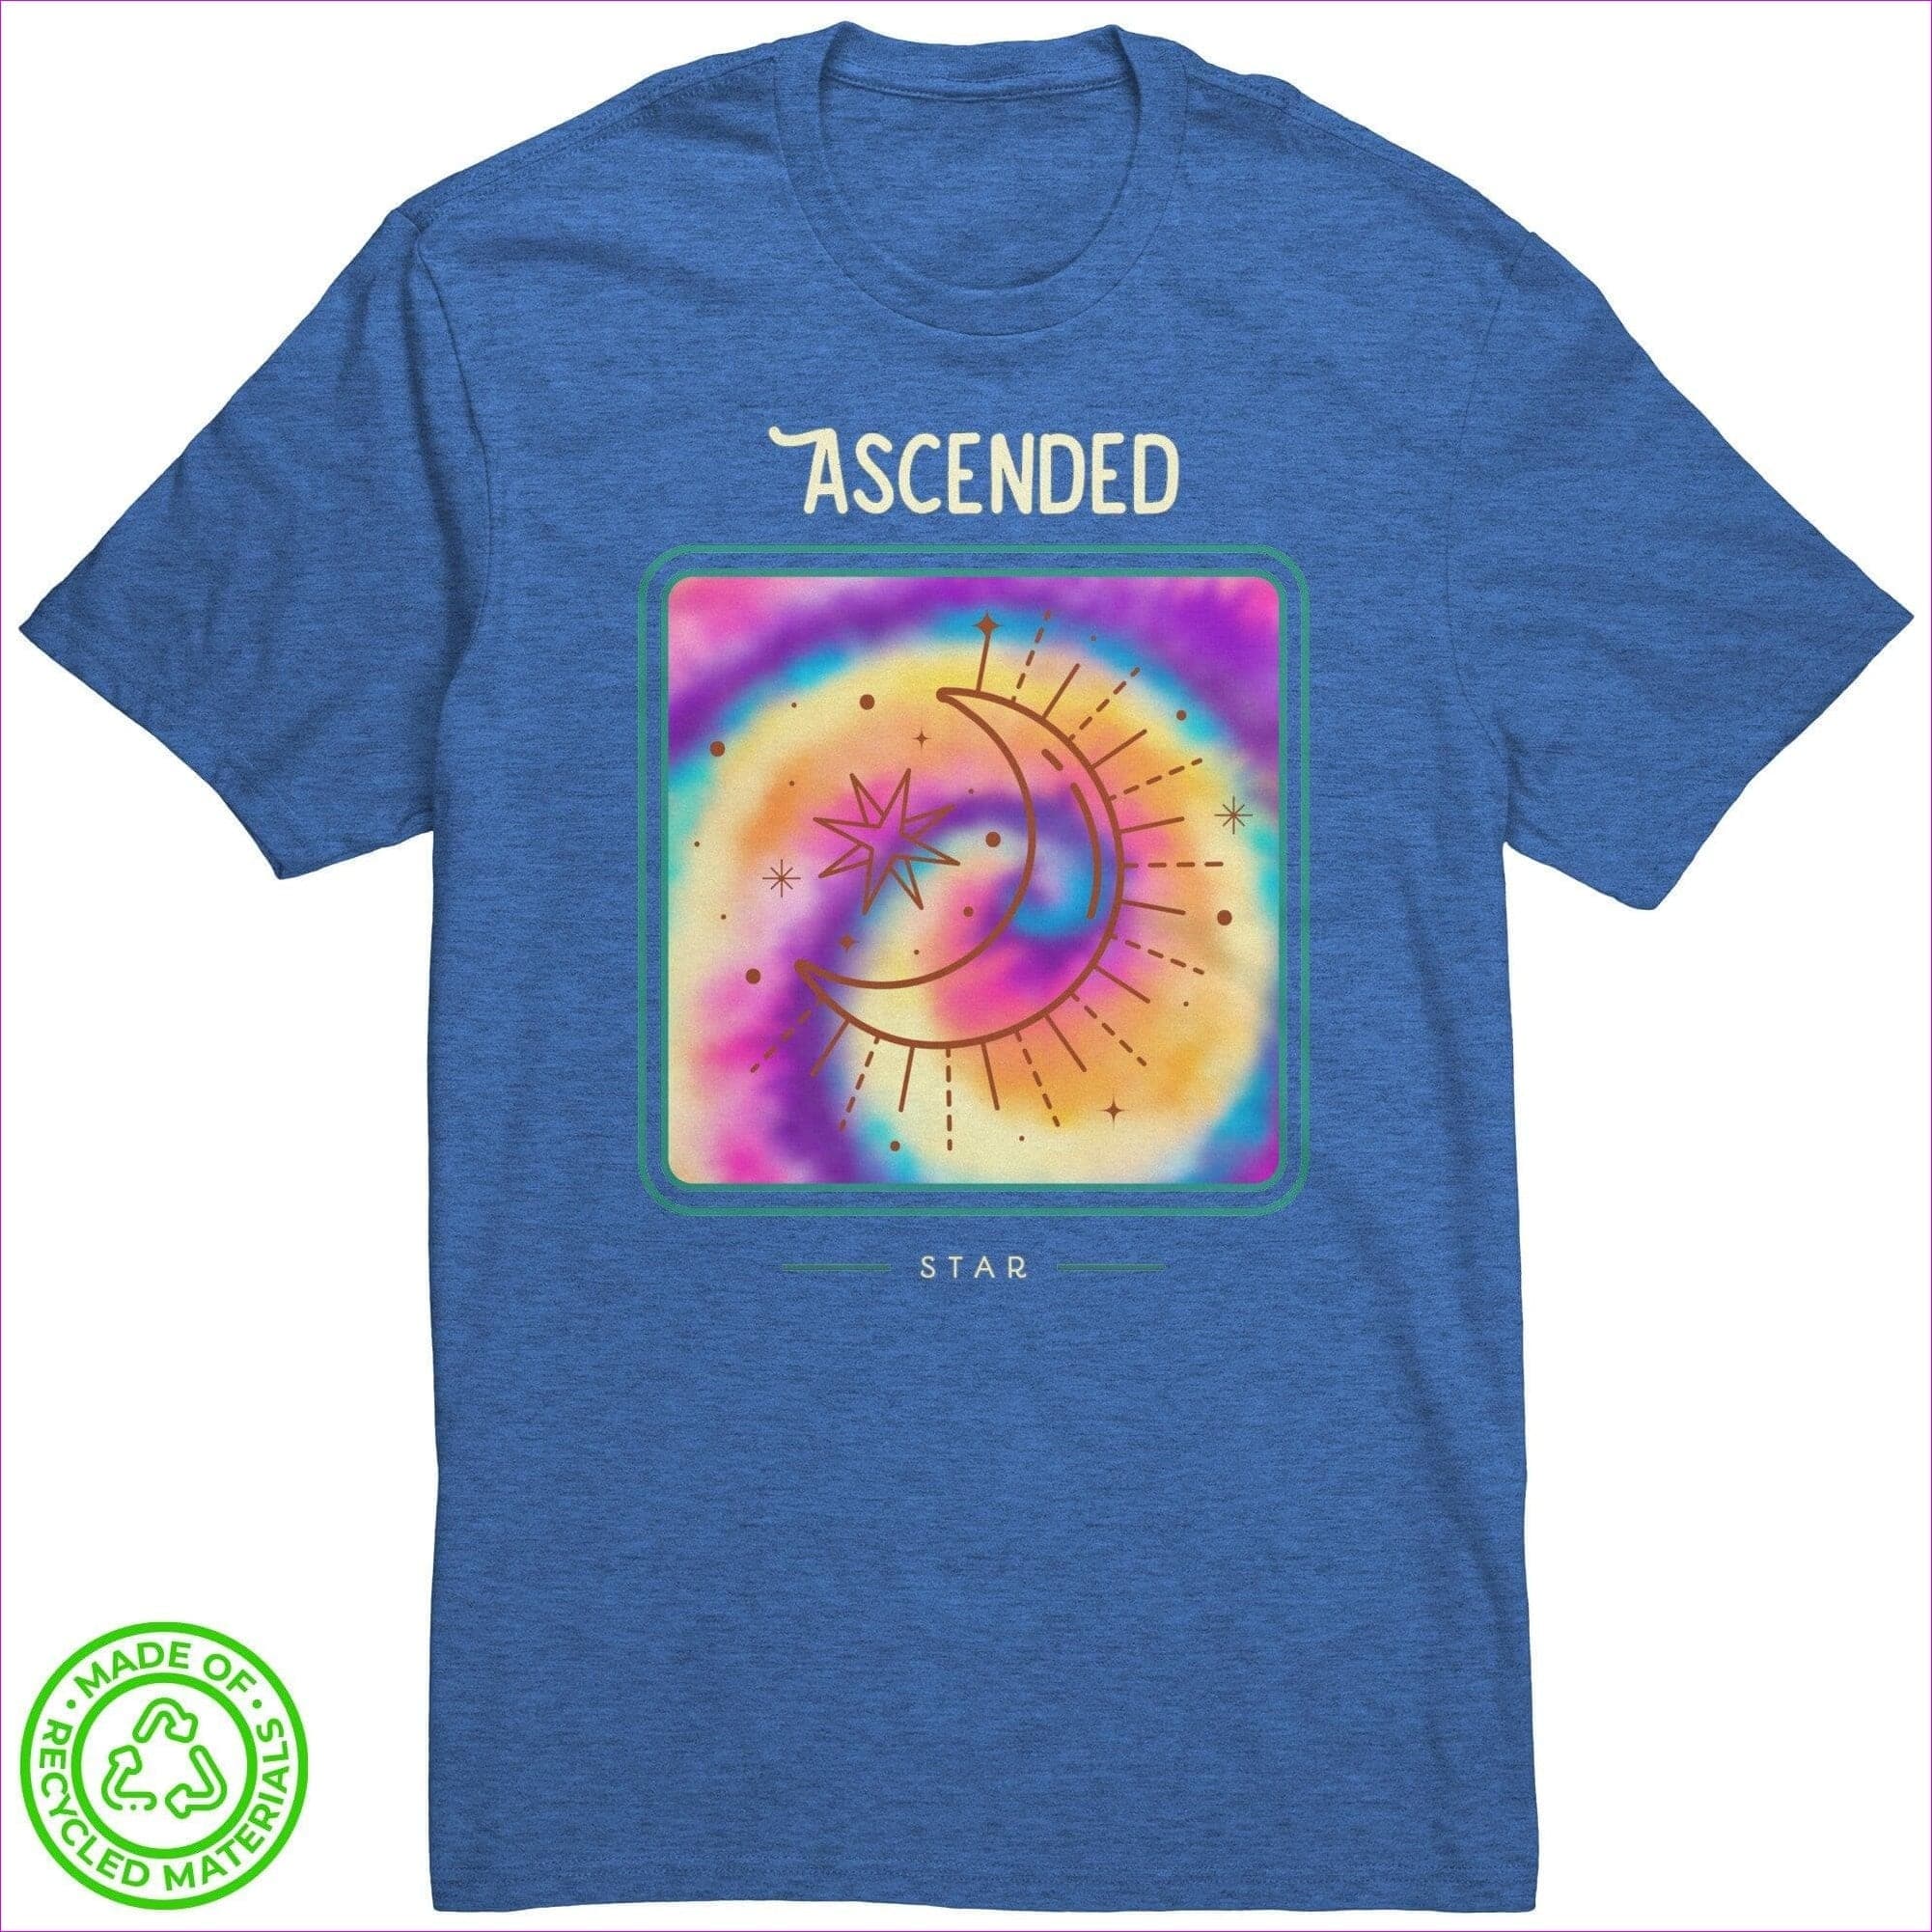 Blue Heather - Ascended Recycled Fabric Unisex Tee - Unisex T-Shirt at TFC&H Co.